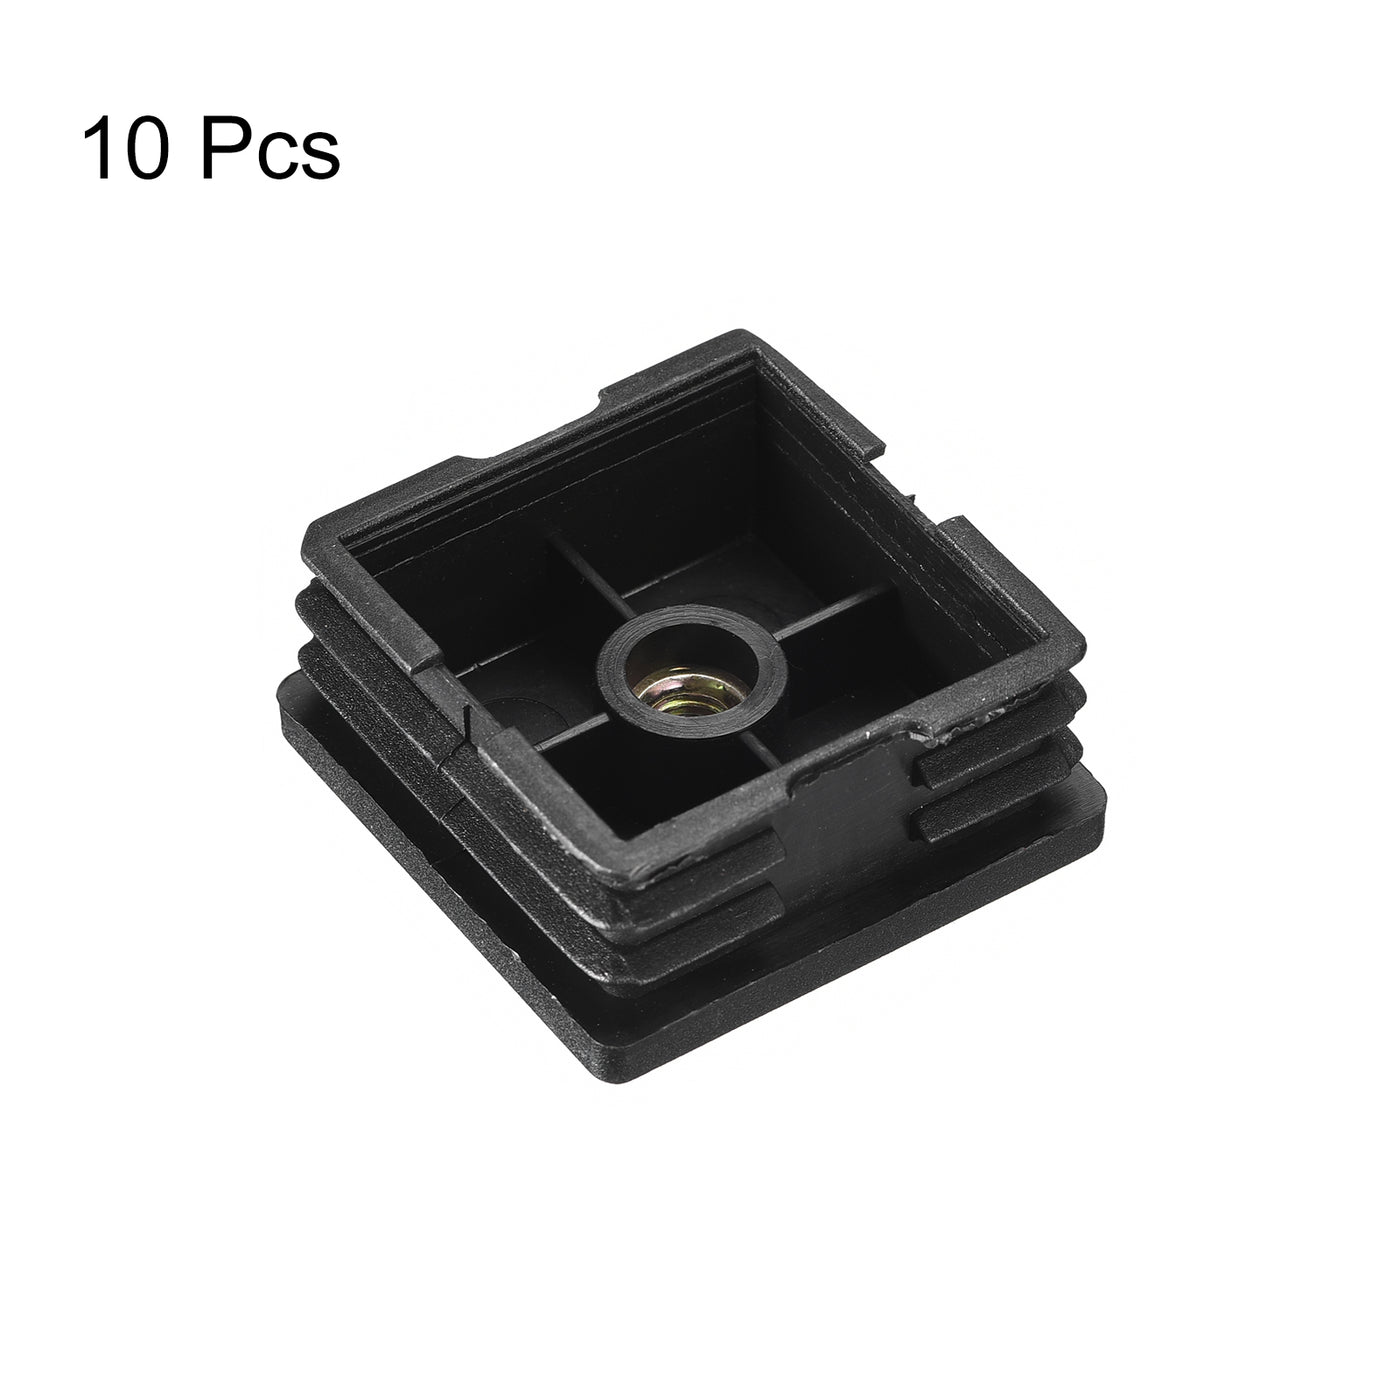 uxcell Uxcell 10Pcs 1.97"x1.97" Caster Insert with Thread, Square M8 Thread for Furniture